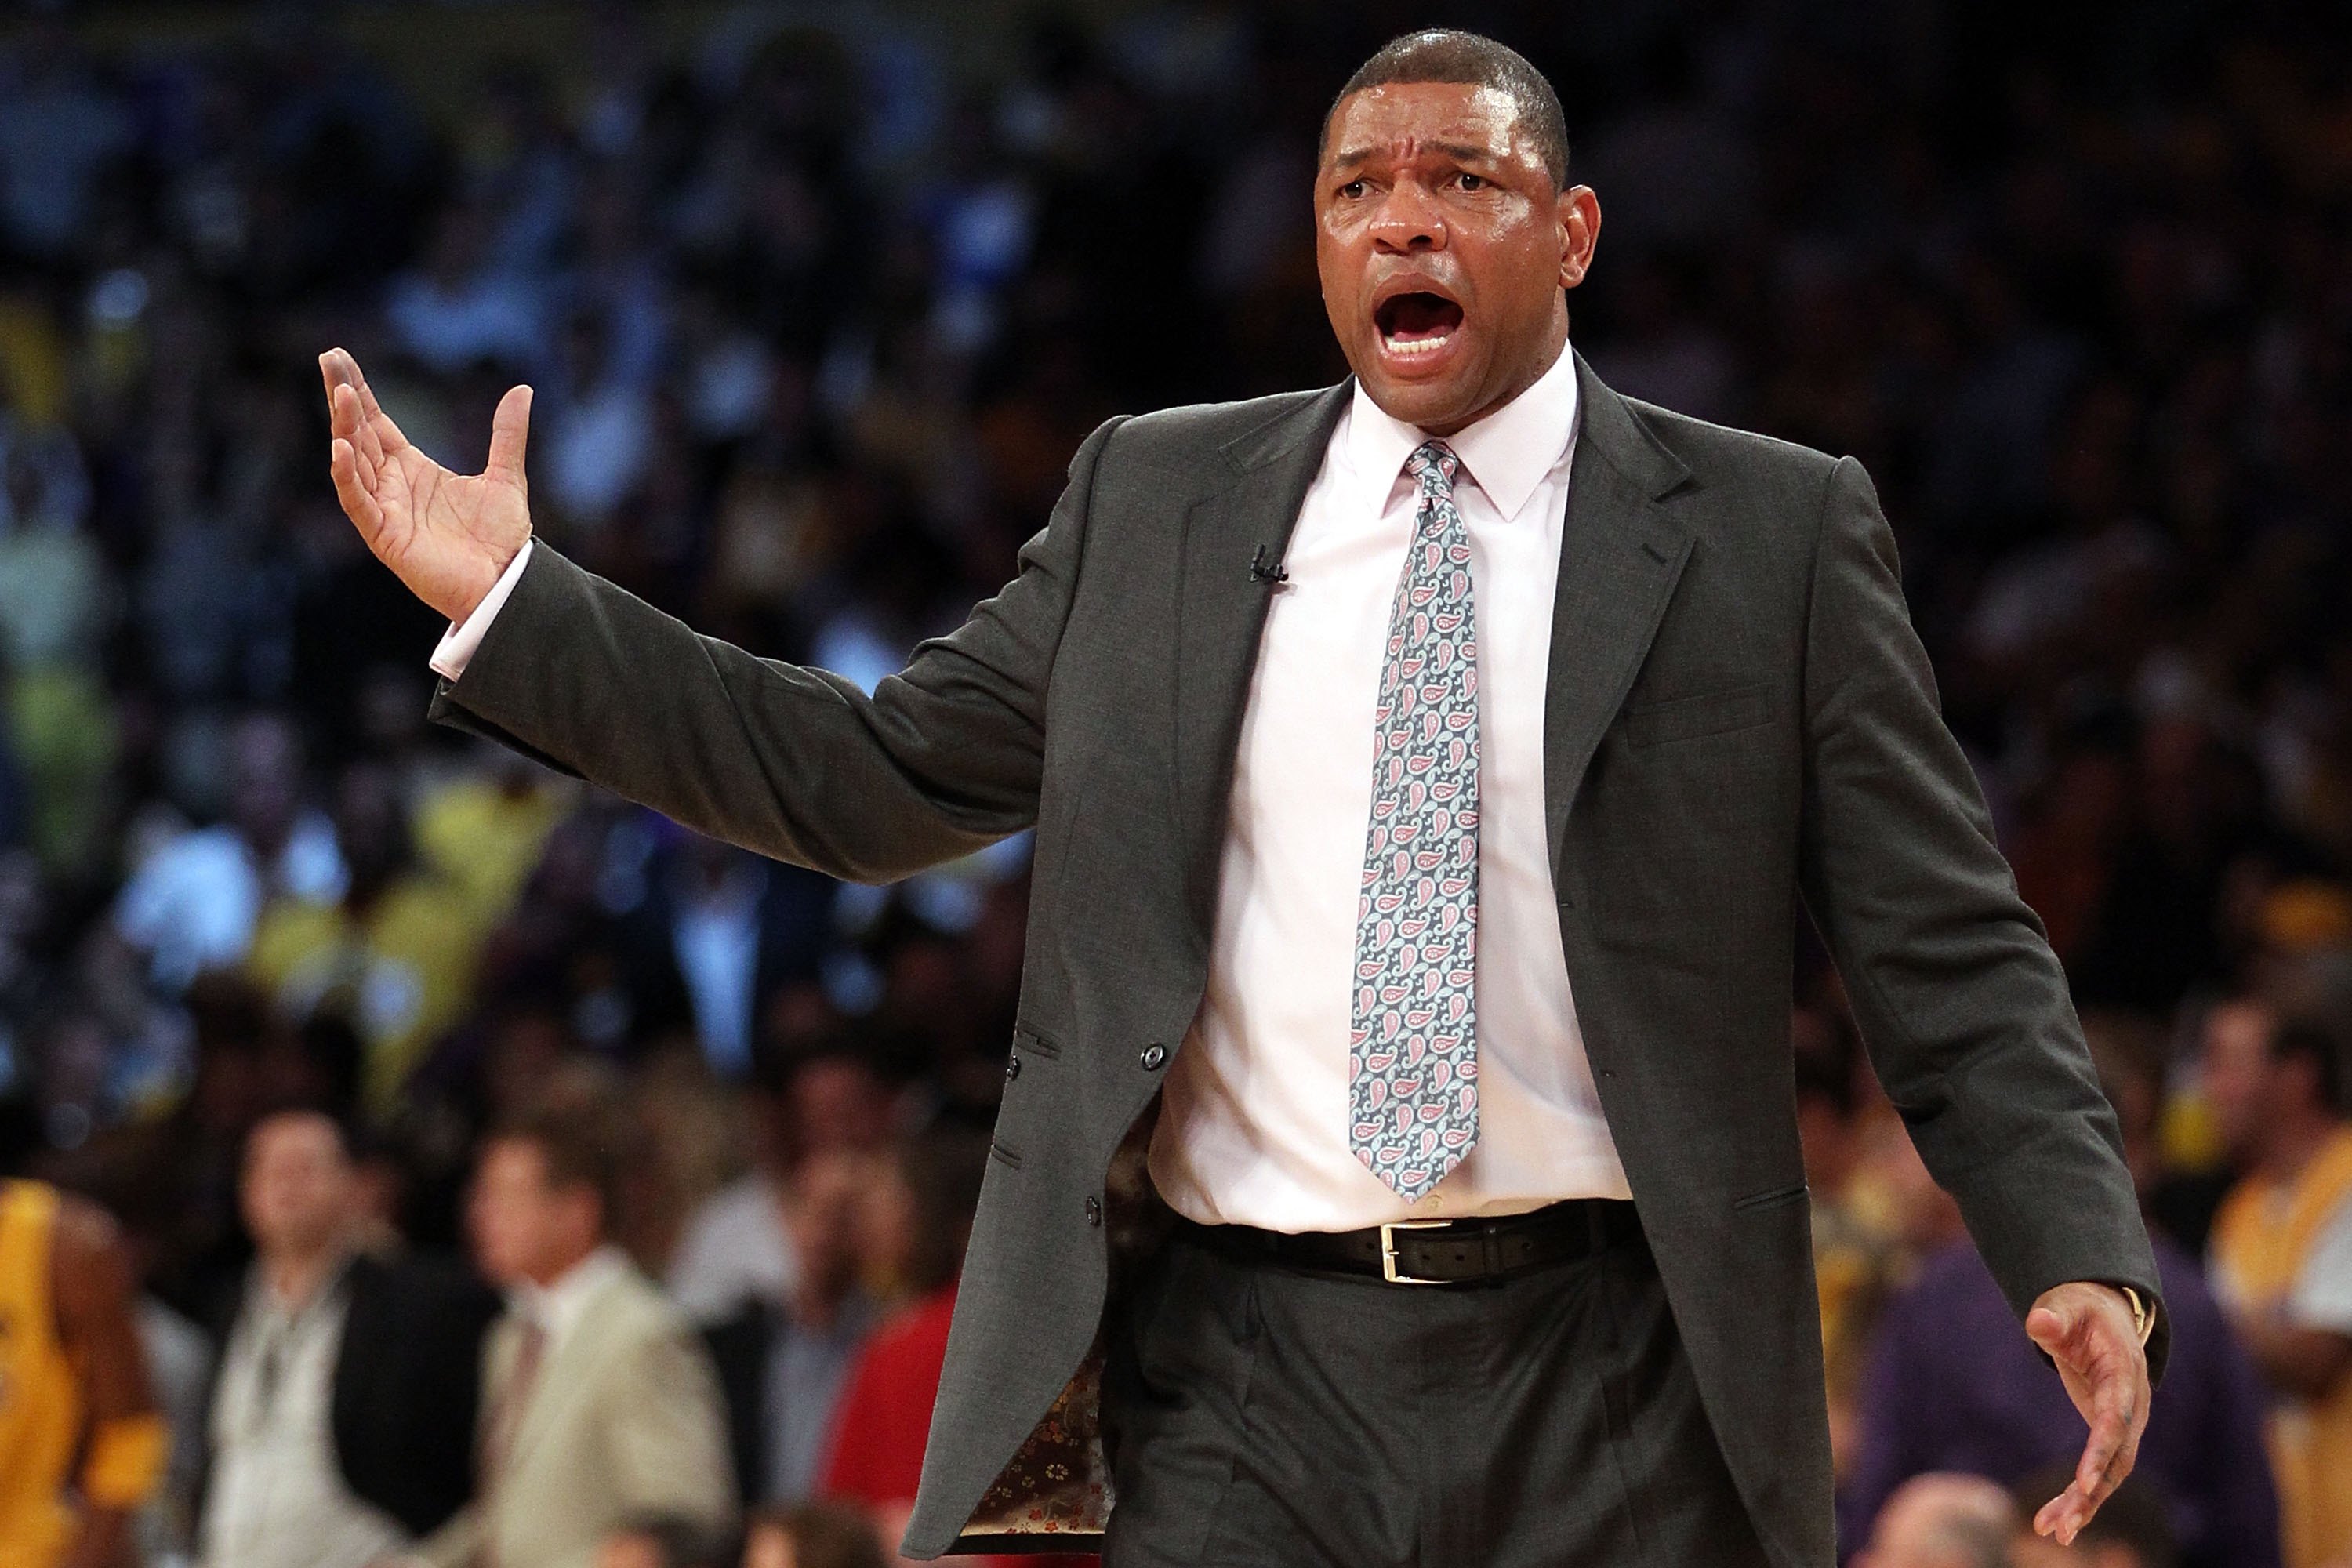 LOS ANGELES, CA - JUNE 17:  Head coach Doc Rivers of the Boston Celtics reacts while taking on the Los Angeles Lakers in Game Seven of the 2010 NBA Finals at Staples Center on June 17, 2010 in Los Angeles, California.  NOTE TO USER: User expressly acknowl